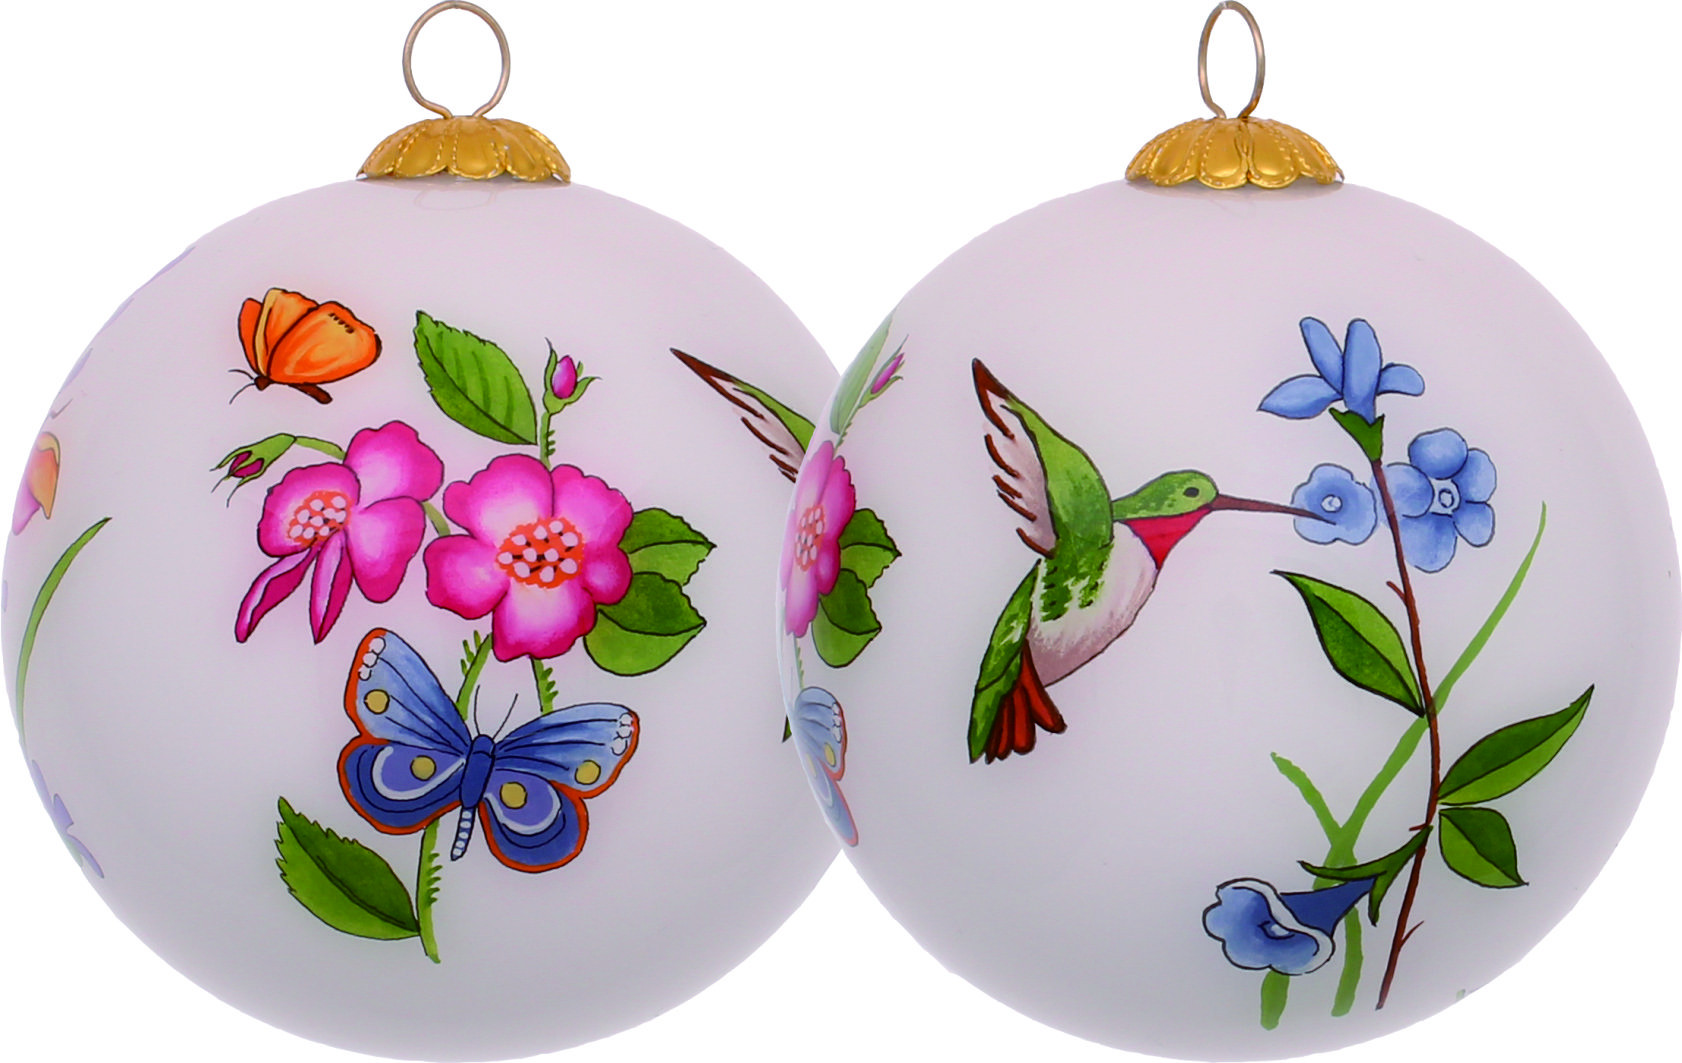 Decorative Florals Hand Painted Mouth Blown Glass Ornament